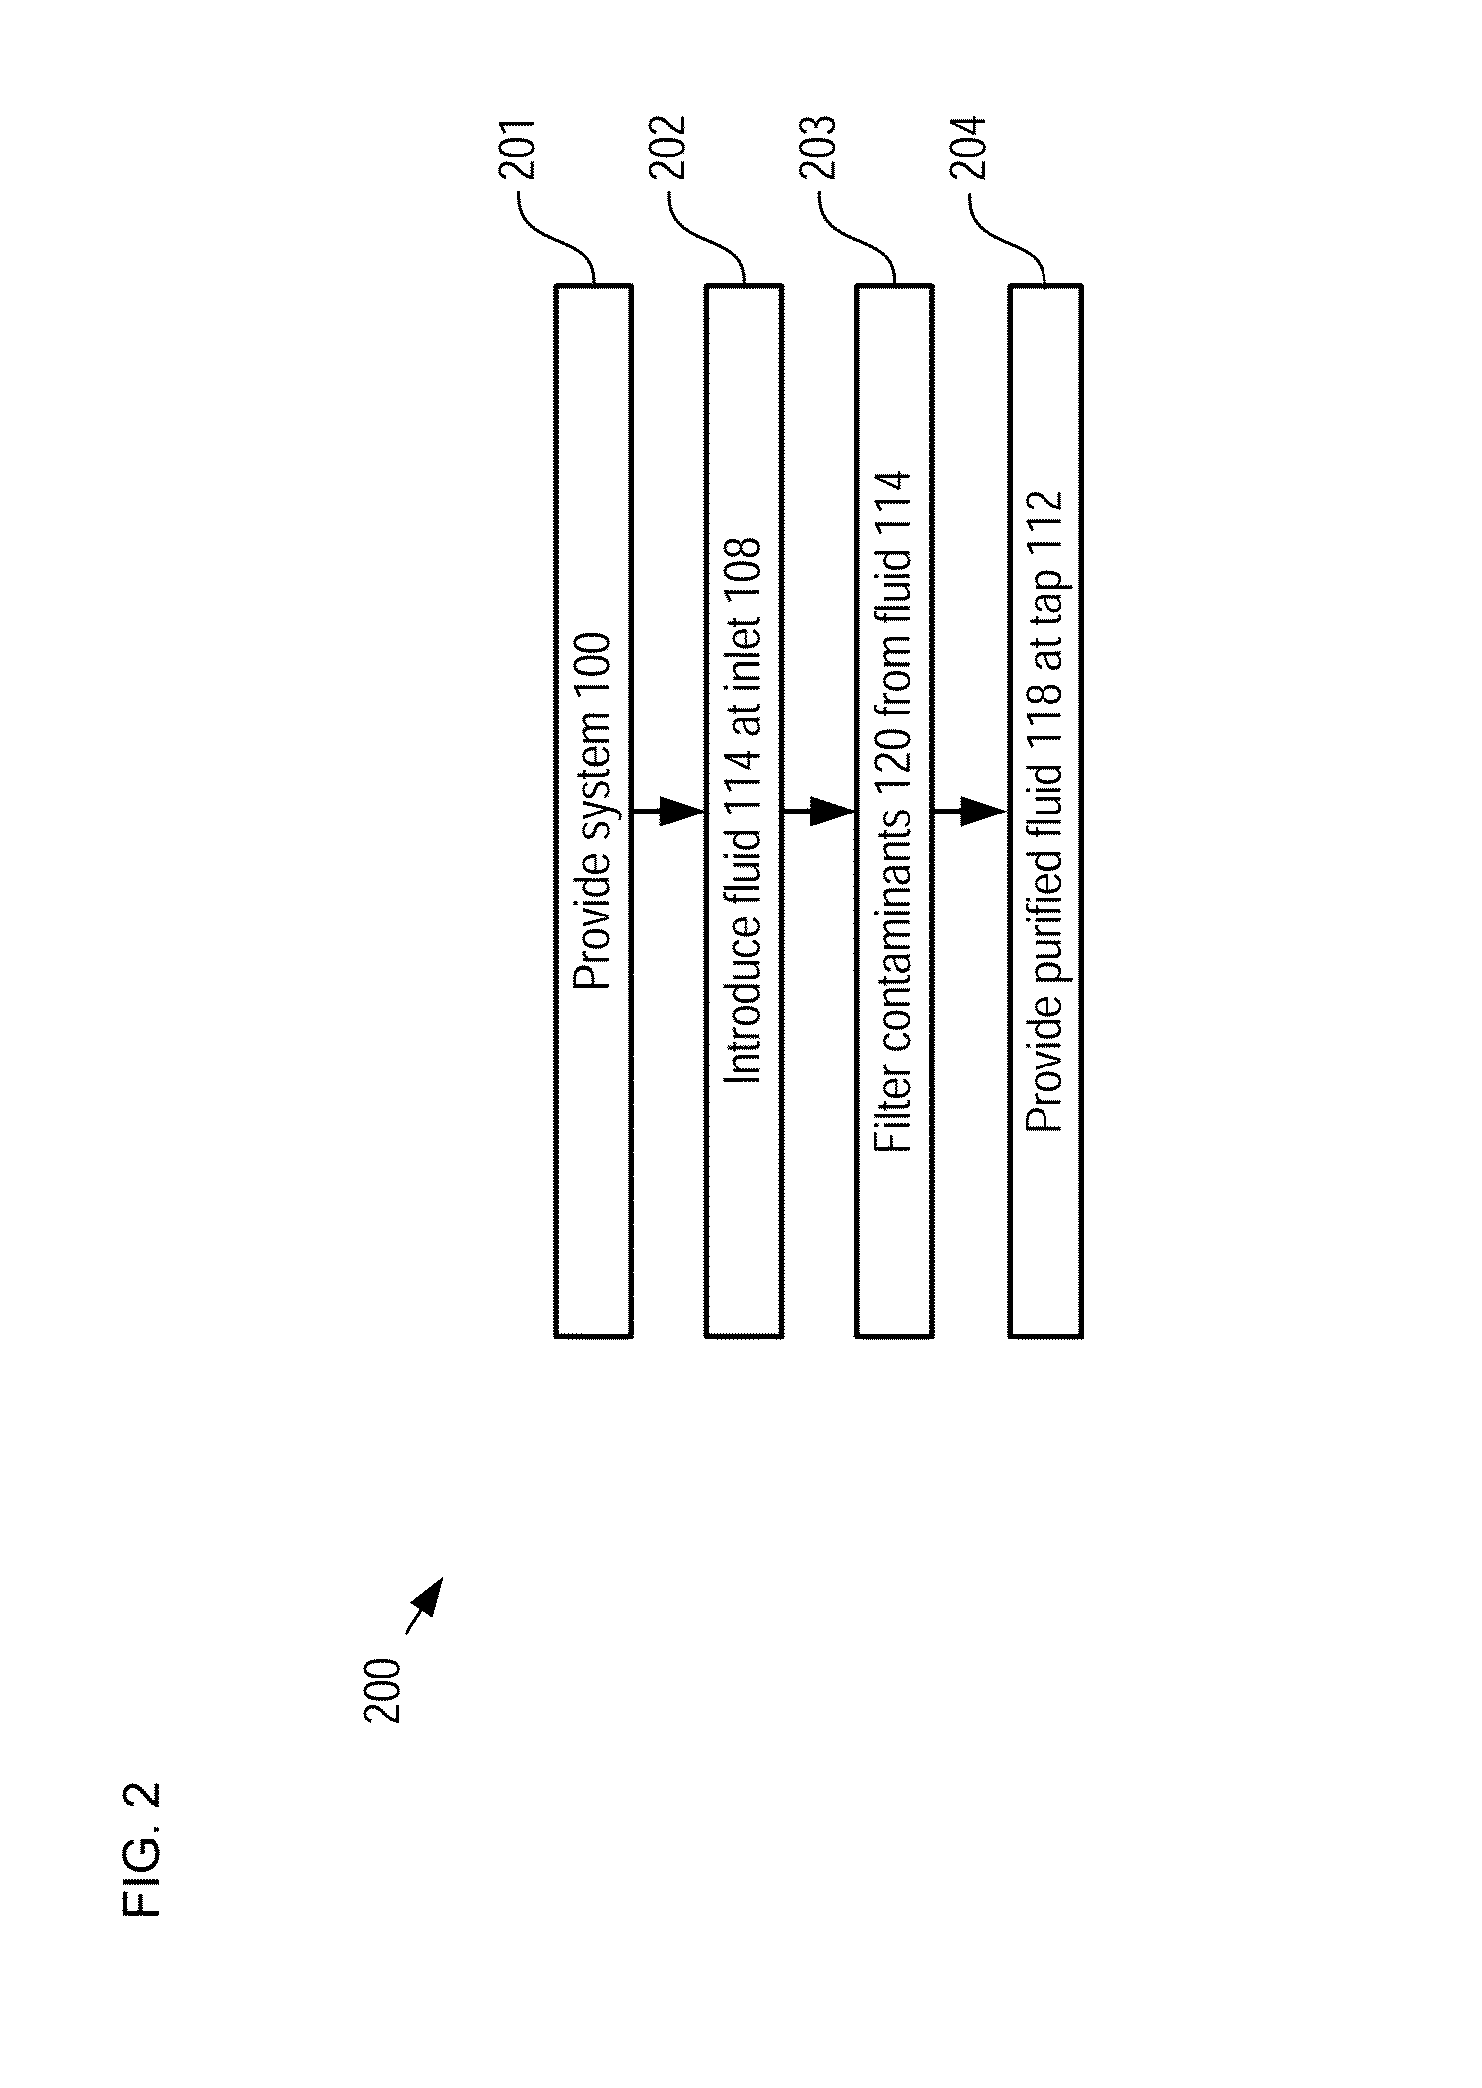 Apparatus for filtration and desalination and method therefor